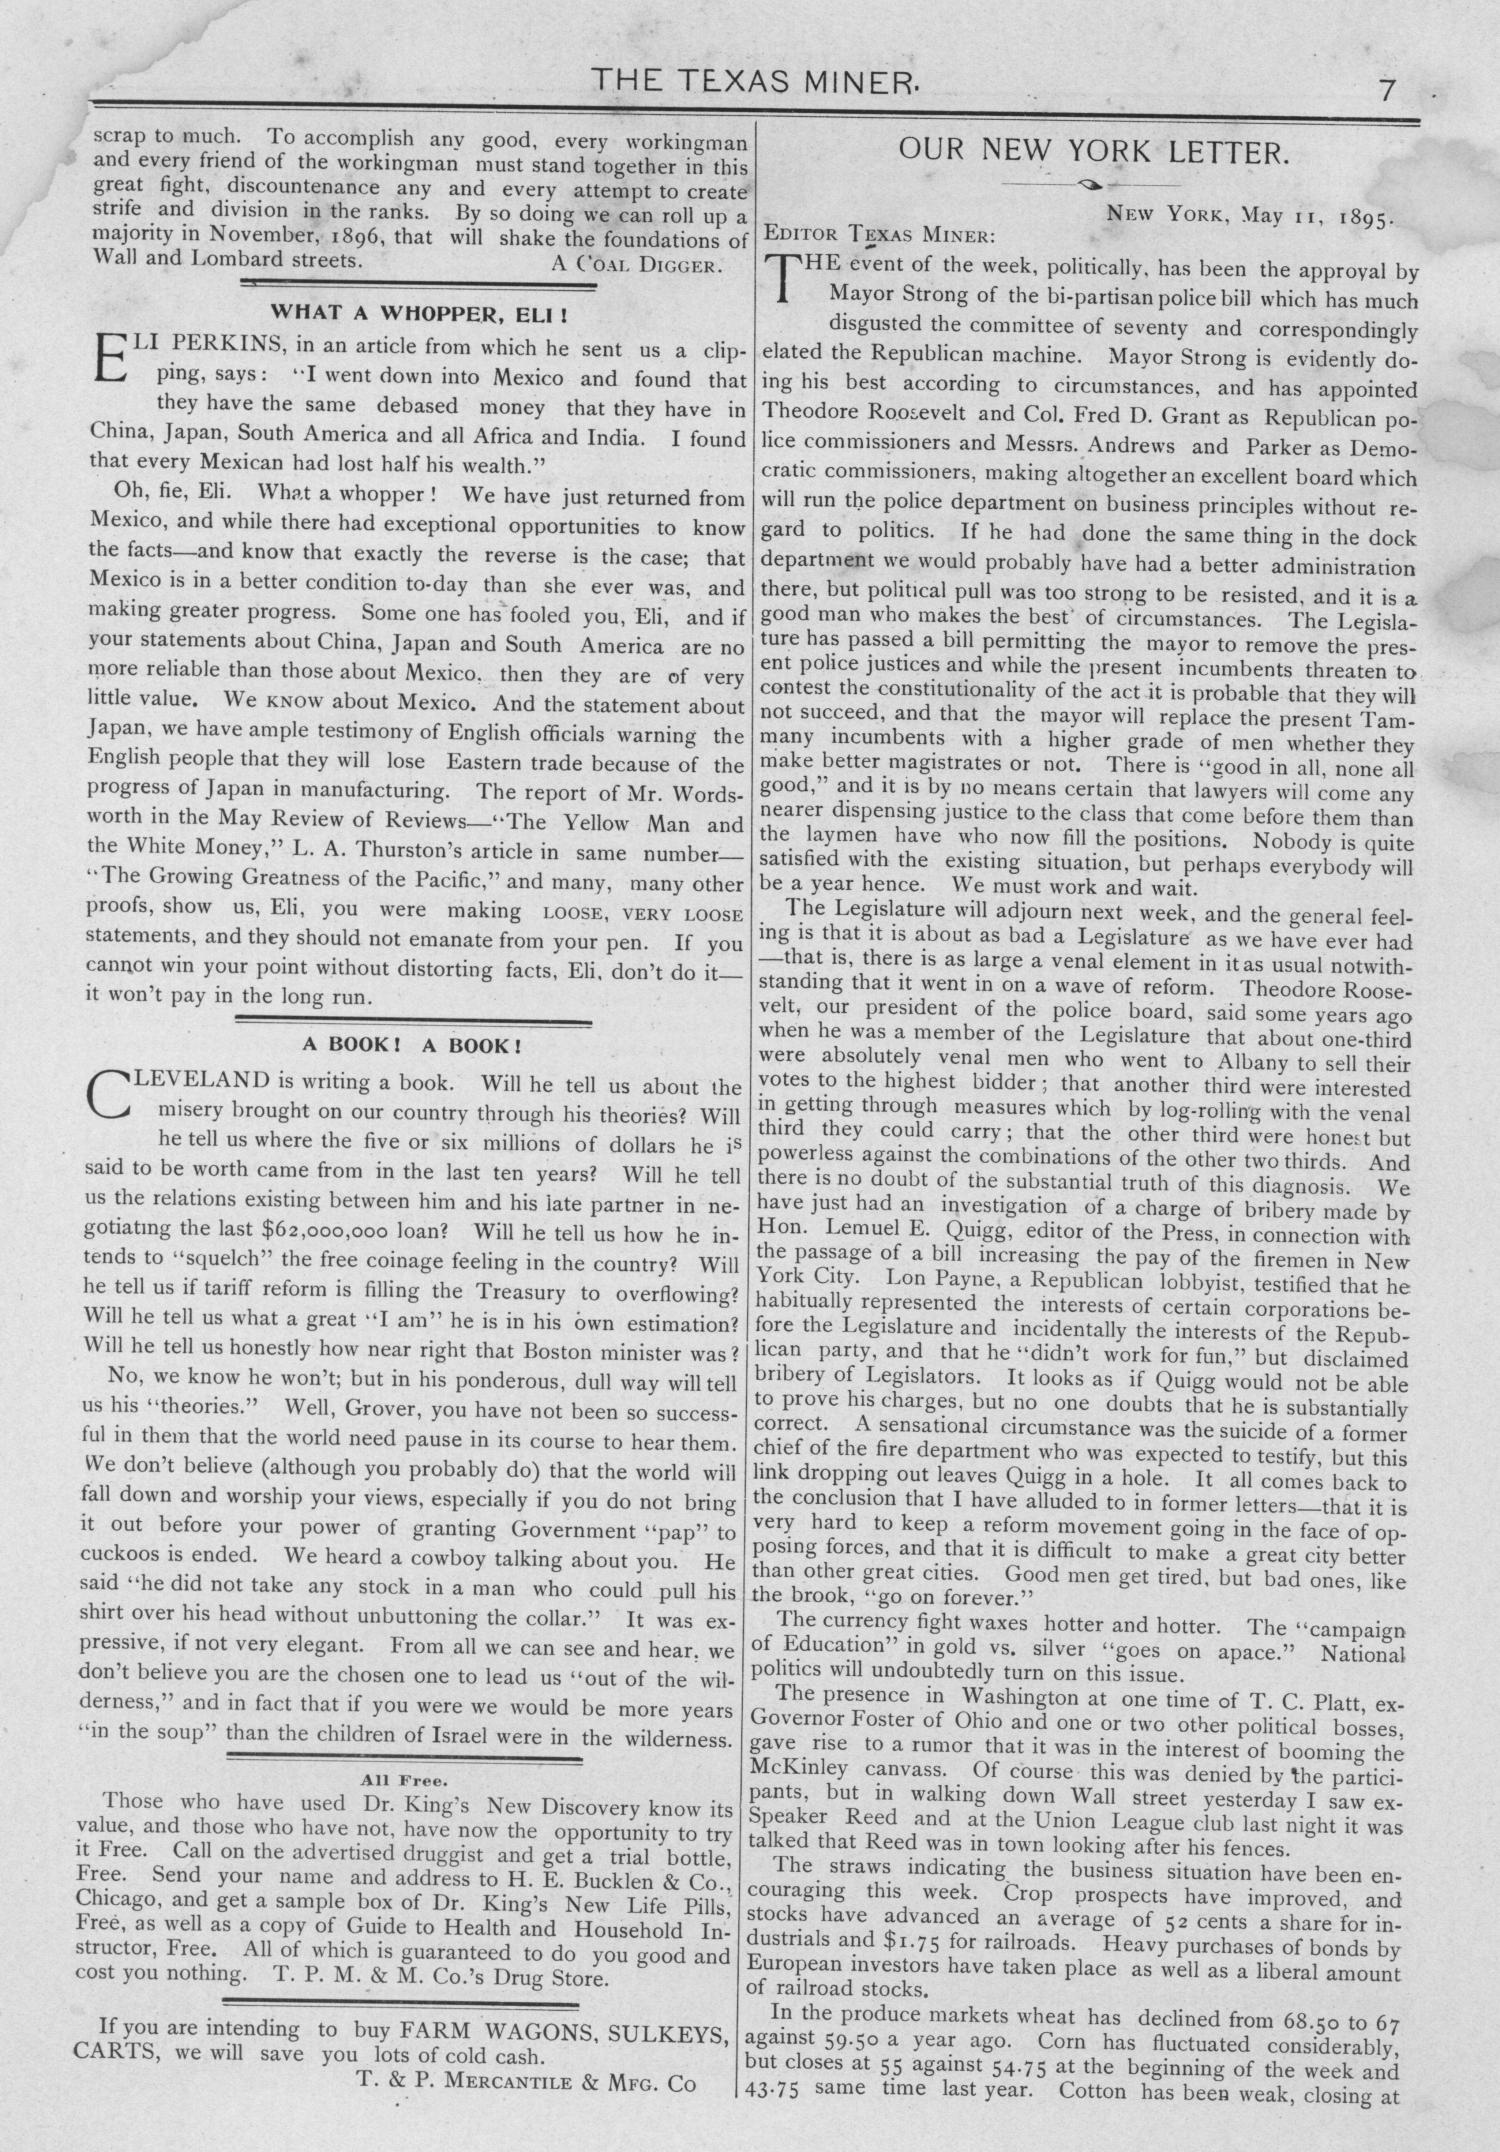 The Texas Miner, Volume 2, Number 18, May 18, 1895
                                                
                                                    7
                                                